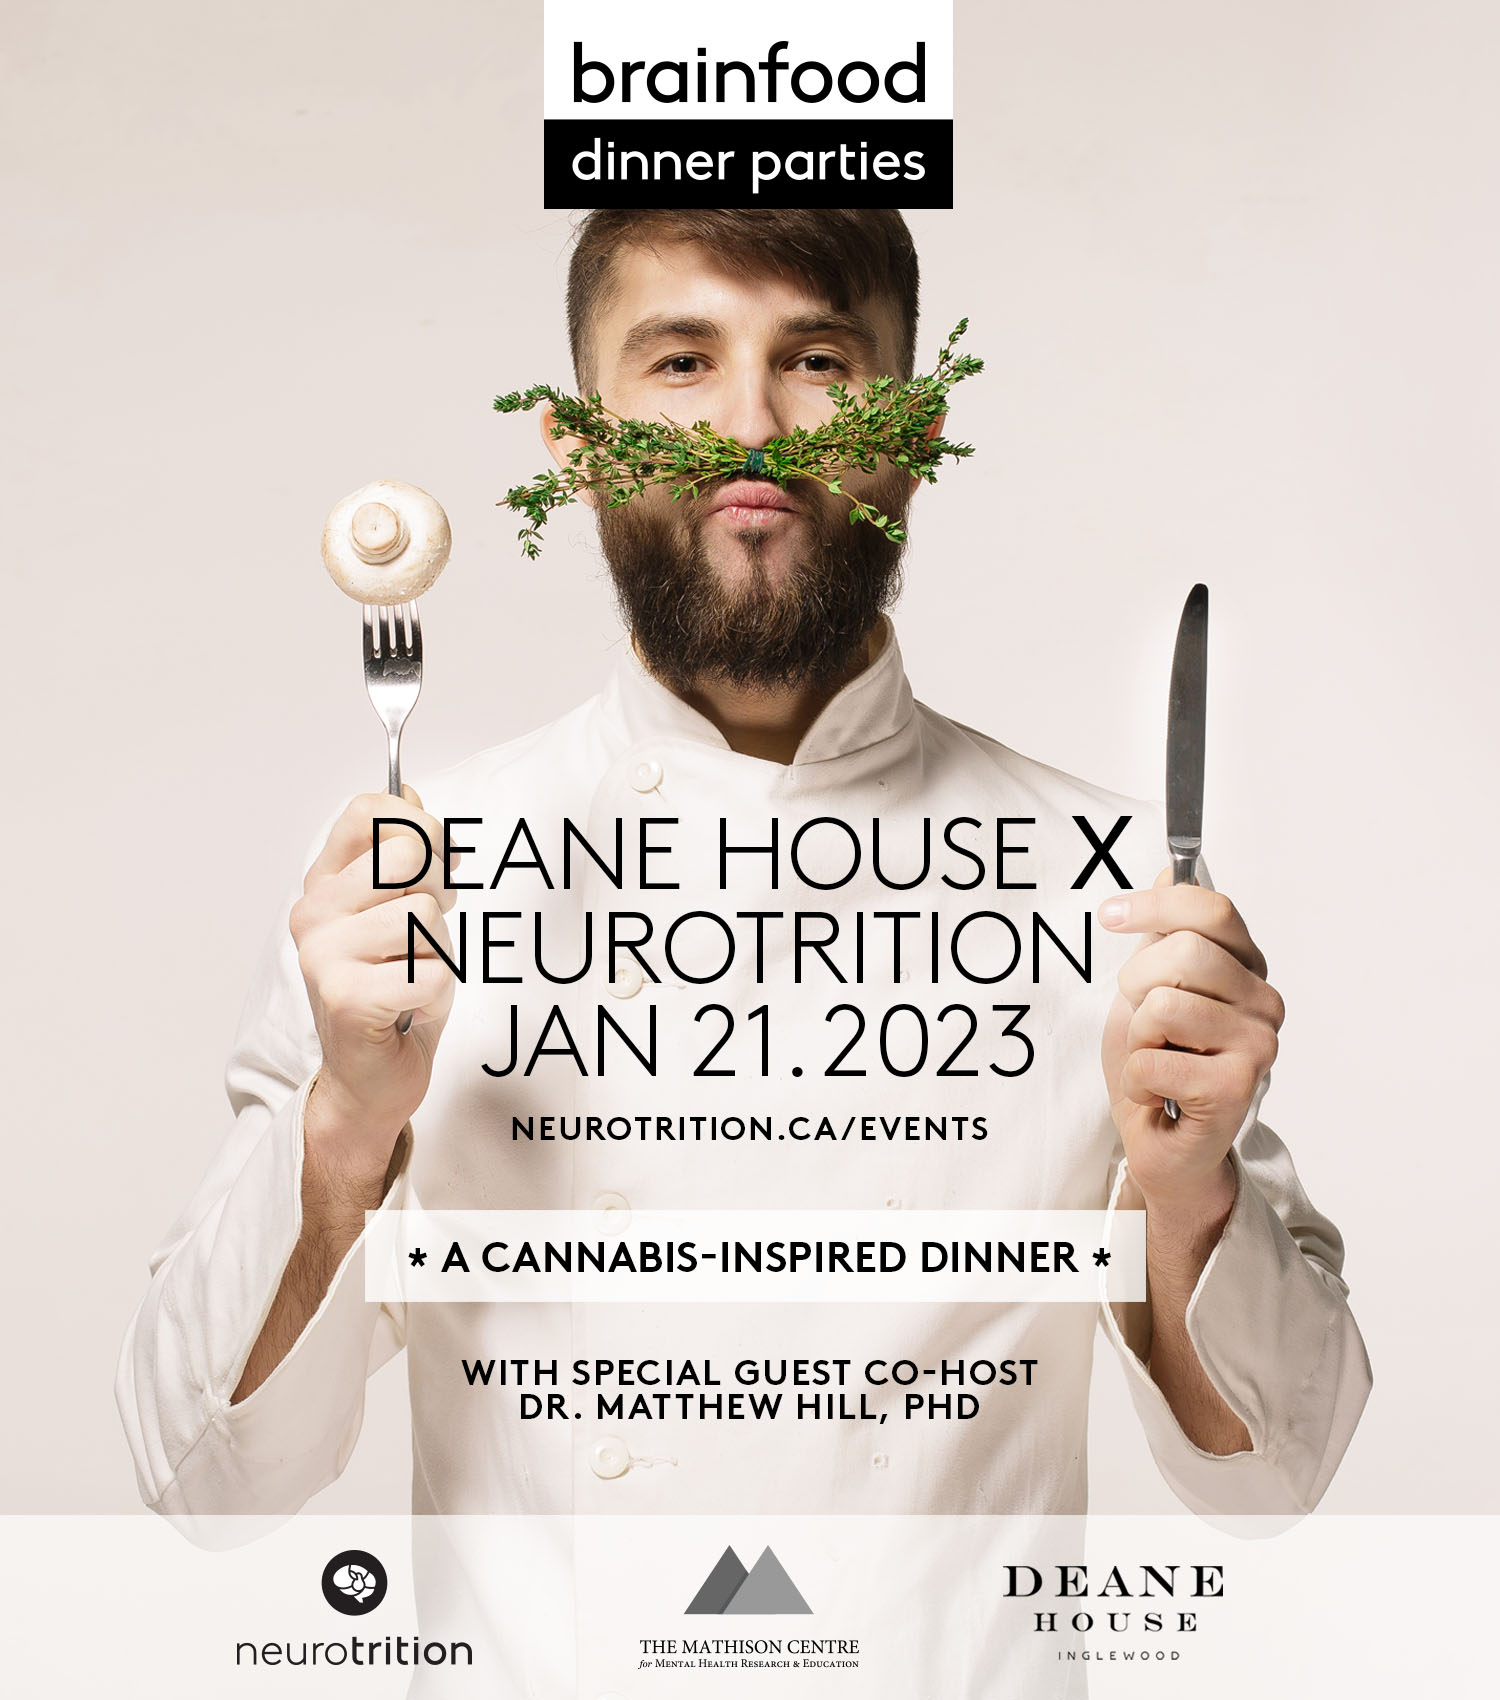 Chef facing the camera holding up a knife and fork in each hand with herbs between his nose and mouth. Text reads "Deane House X NeuroTrition Jan 21, 2023. A Cannabis-Inspired Dinner with special guest co-host Dr. Matthew Hill, PhD